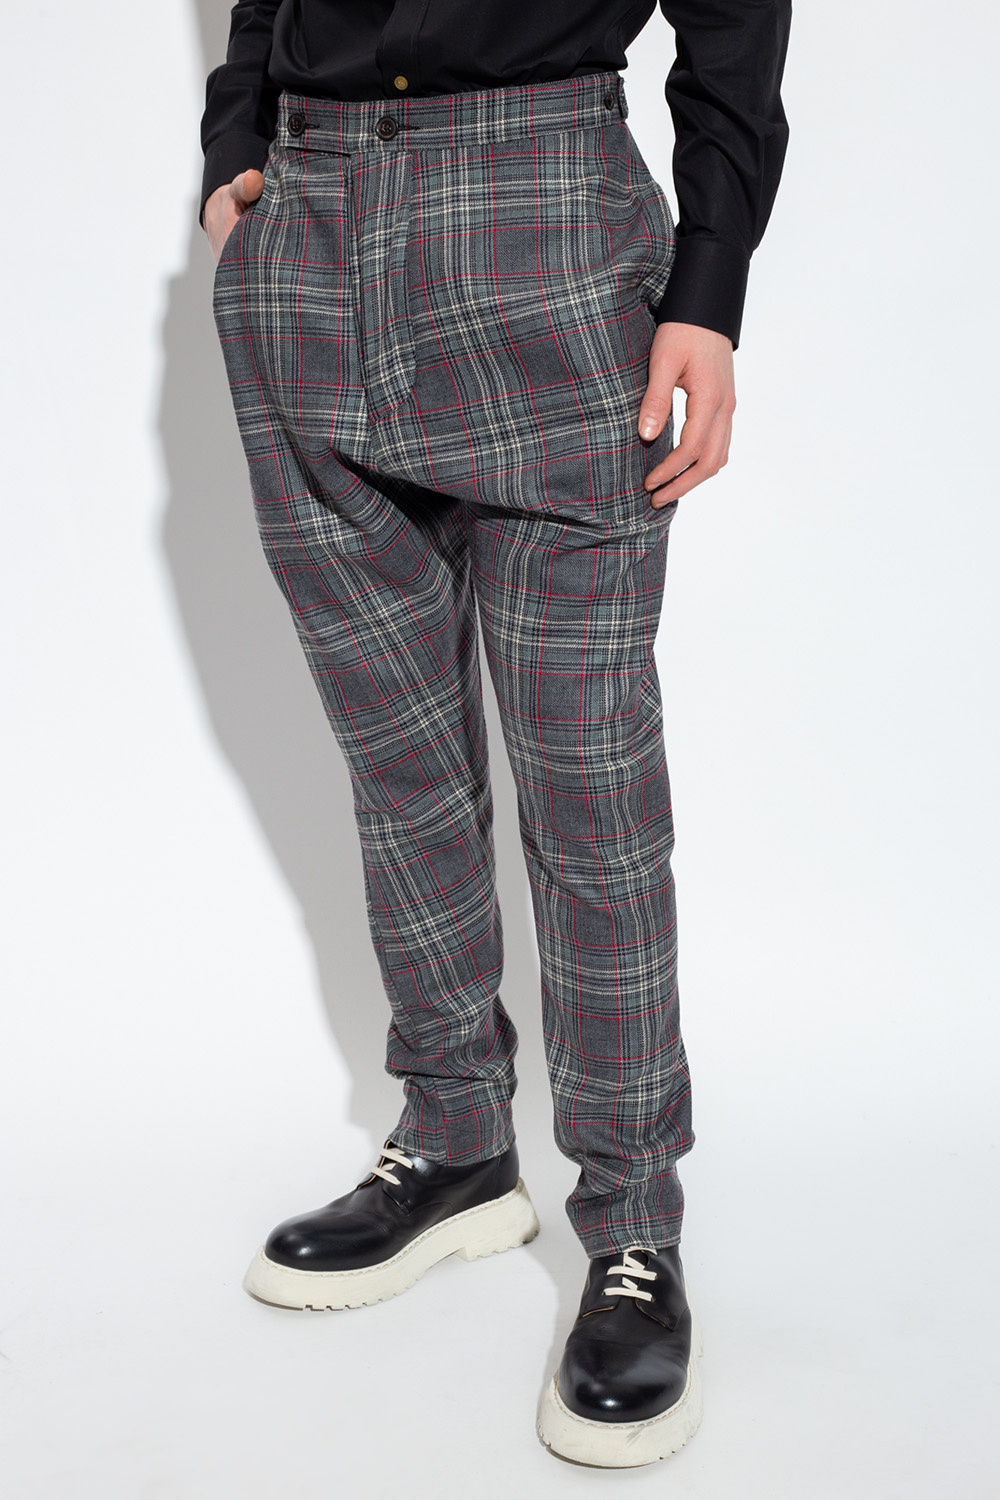 Vivienne Westwood Trousers with 'Drunken' finish | Men's Clothing